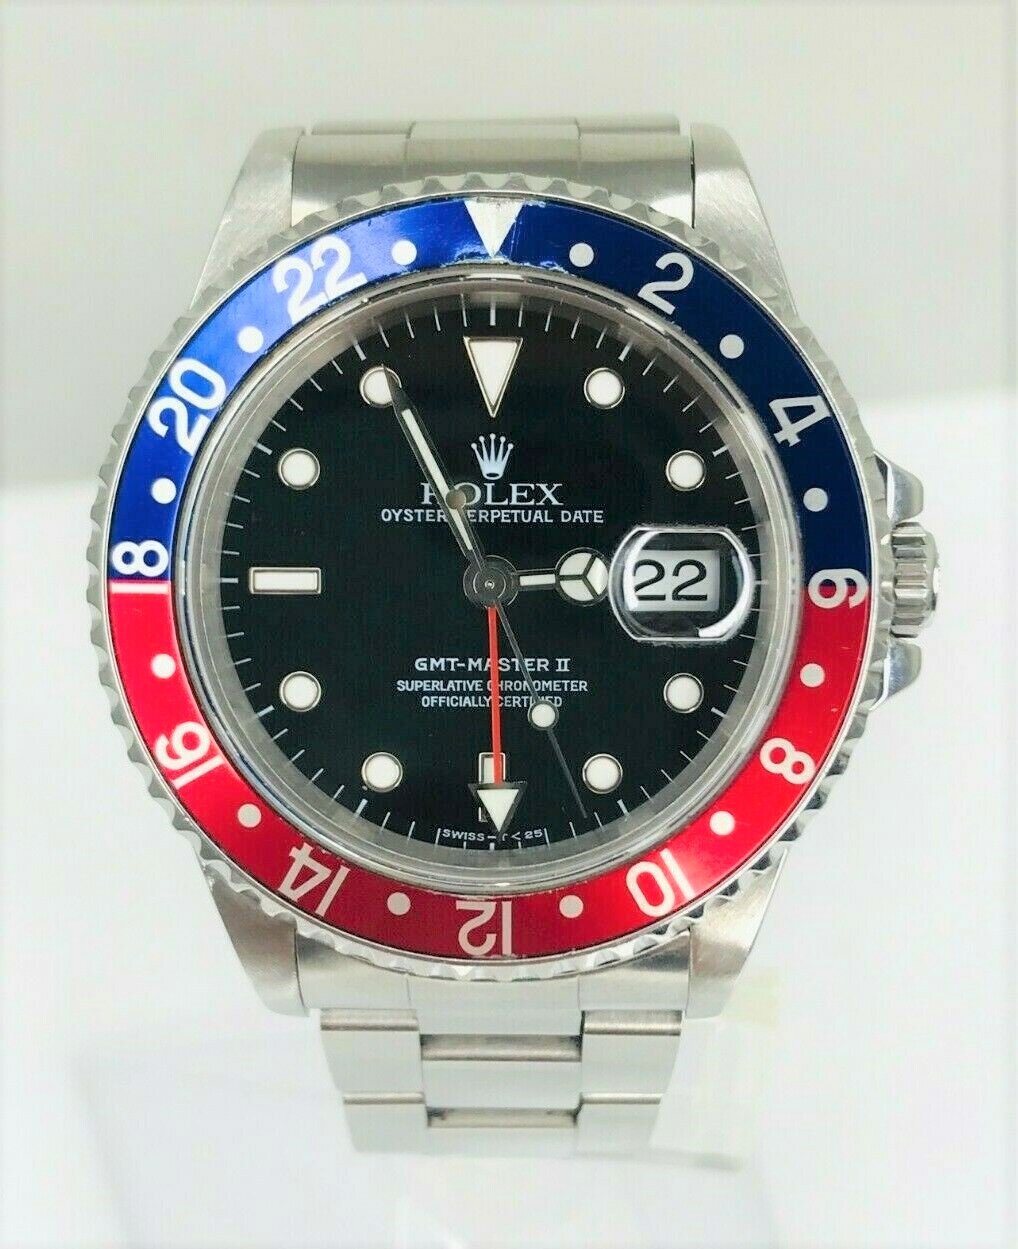 Antarktis Begrænset helbrede Rolex Oyster Perpetual Date GMT-Master II "PEPSI" Red/Blue Watch Ref.16710  40mm. — Tonys Jewelry